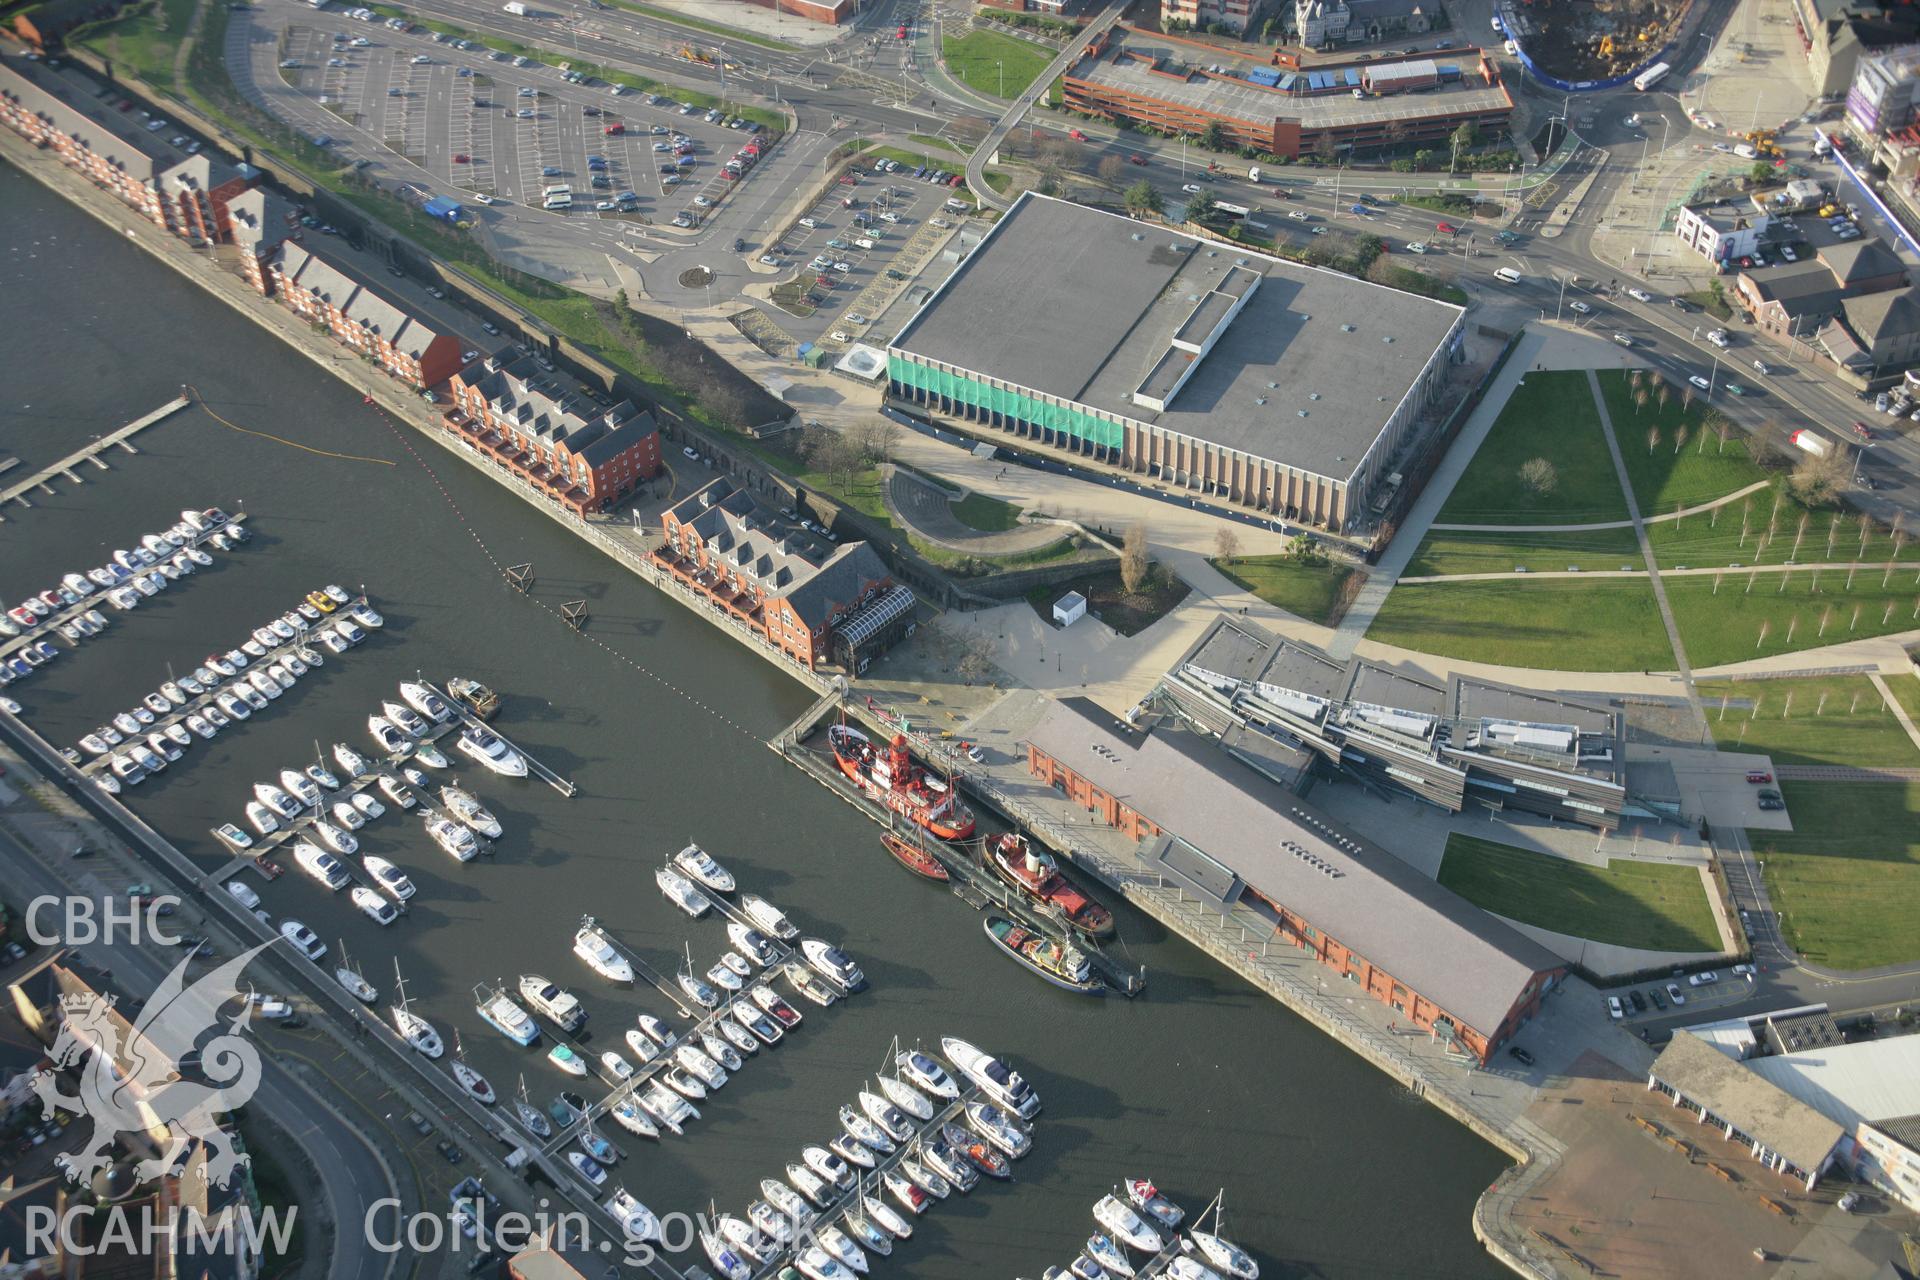 RCAHMW colour oblique aerial photograph of National Waterfront Museum, Swansea, viewed from the south-east. Taken on 26 January 2006 by Toby Driver.